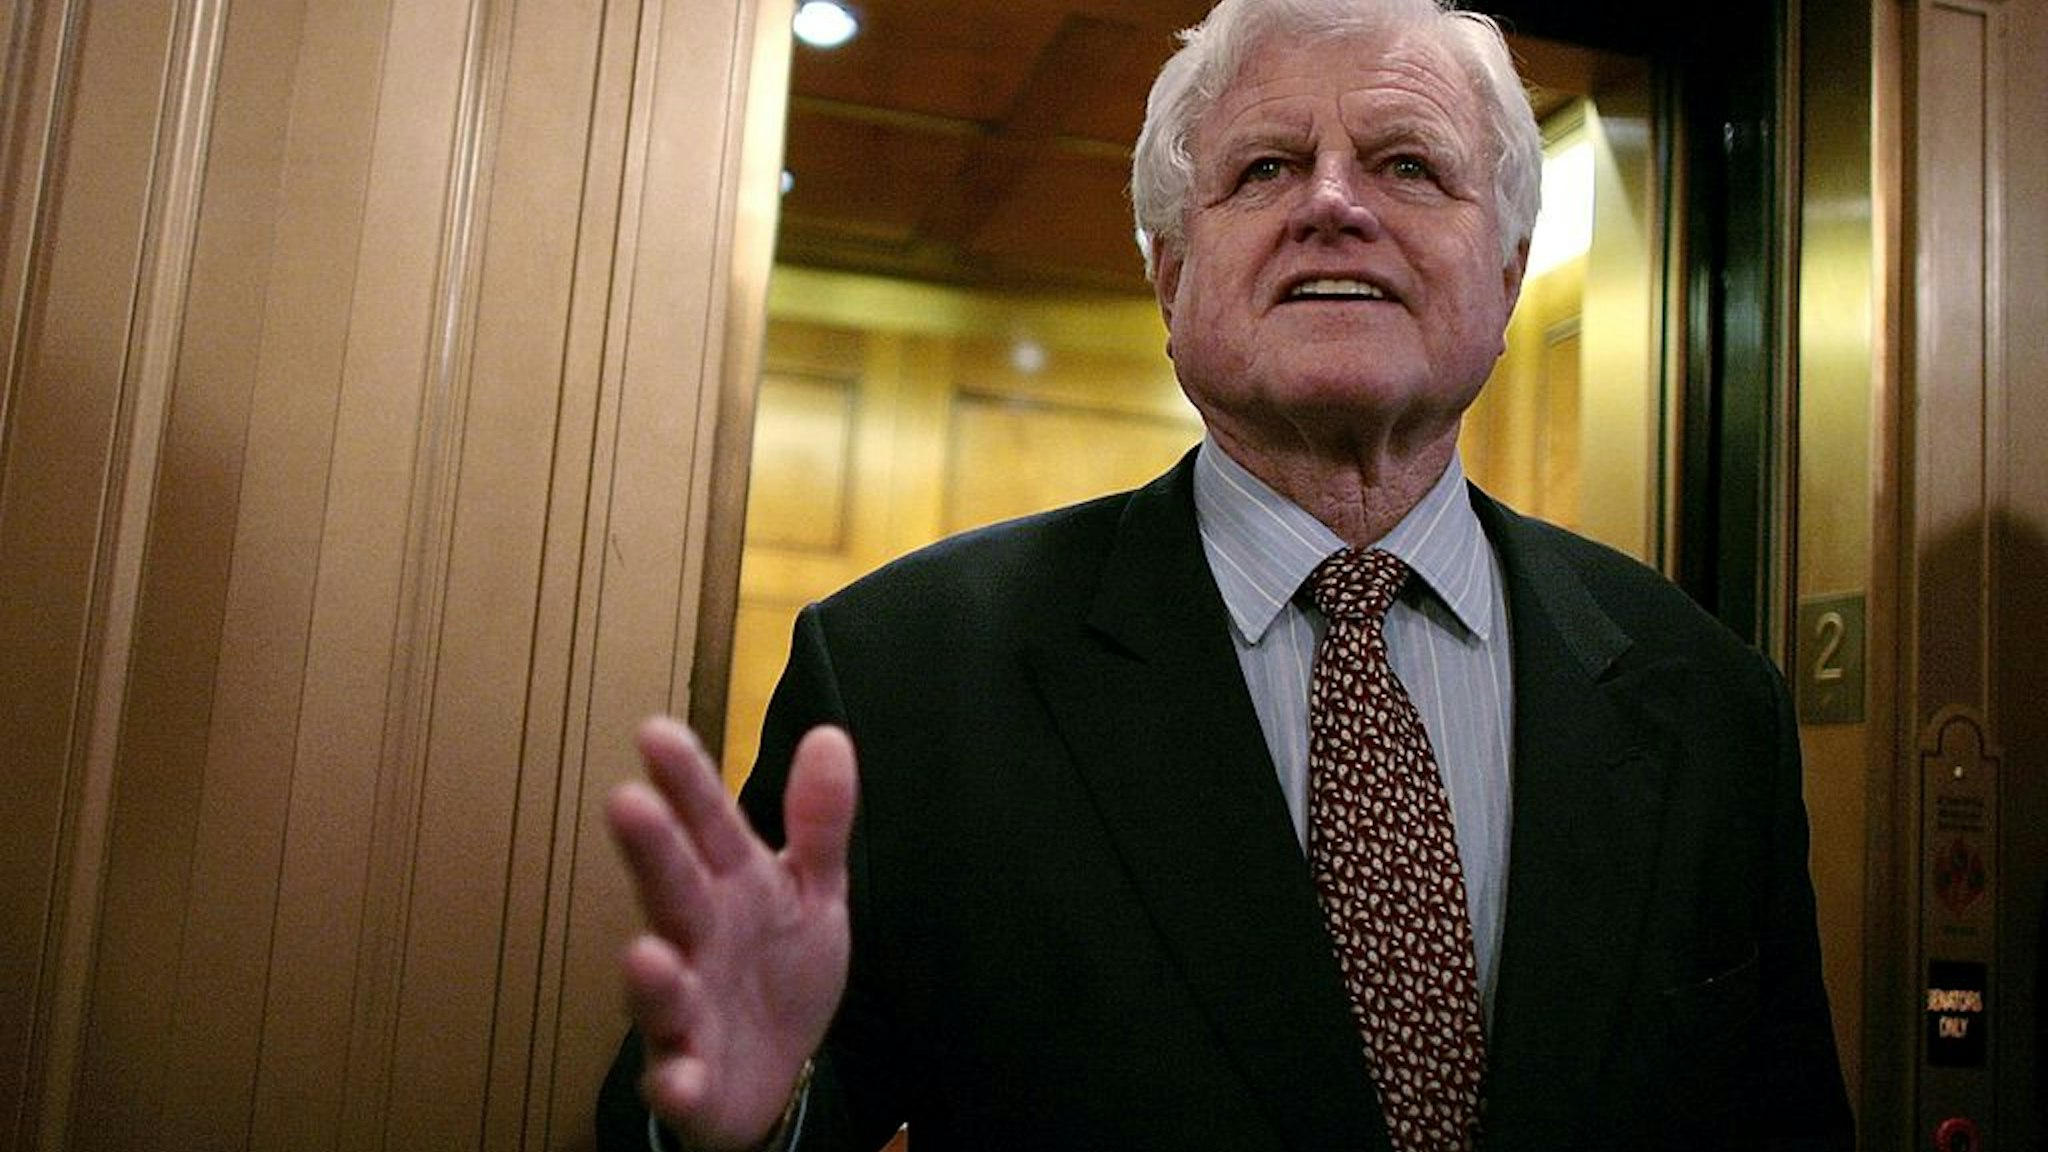 WASHINGTON - JANUARY 30: Senator Ted Kennedy (D-MA) talks with the news media after walking off the floor of the US Senate after a roll call vote to achieve cloture on the nomination of Judge Samuel Alito to the US Supreme Court passed 72 to 25 January 30, 2006 in Washington, DC. Kennedy had threatened to filibuster the cloture vote but failed to get the support he needed.